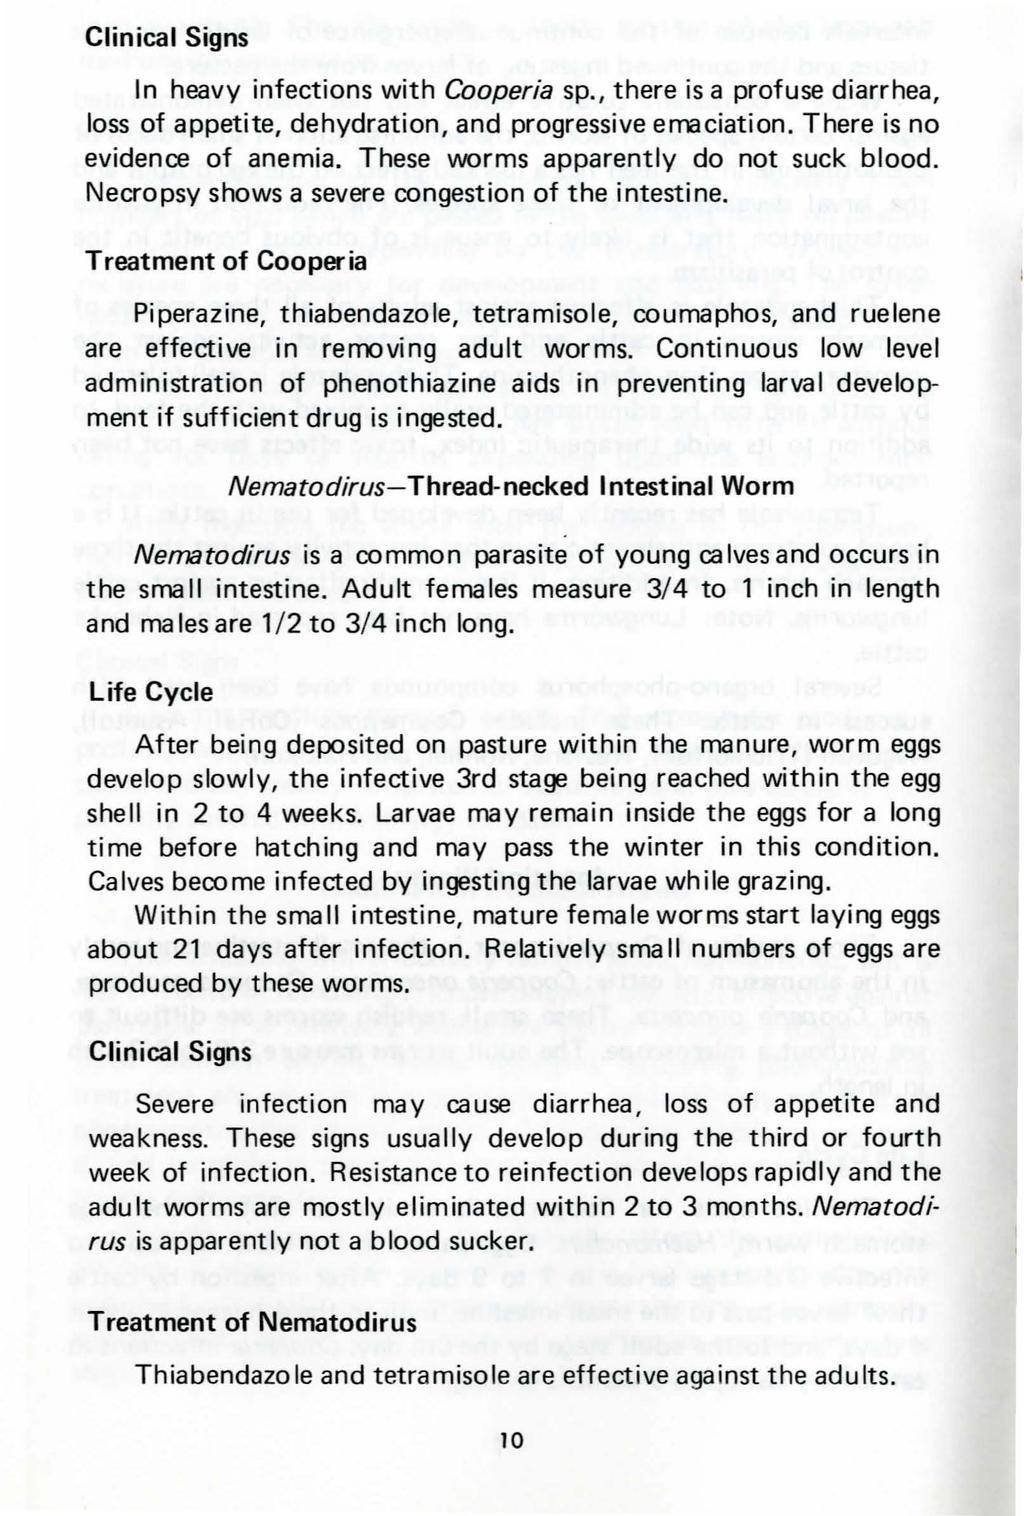 Clinical Signs n heavy infections with Cooperia sp., there is a profuse diarrhea, loss of appetite, dehydration, and progressive emaciation. There is no evidence of anemia.